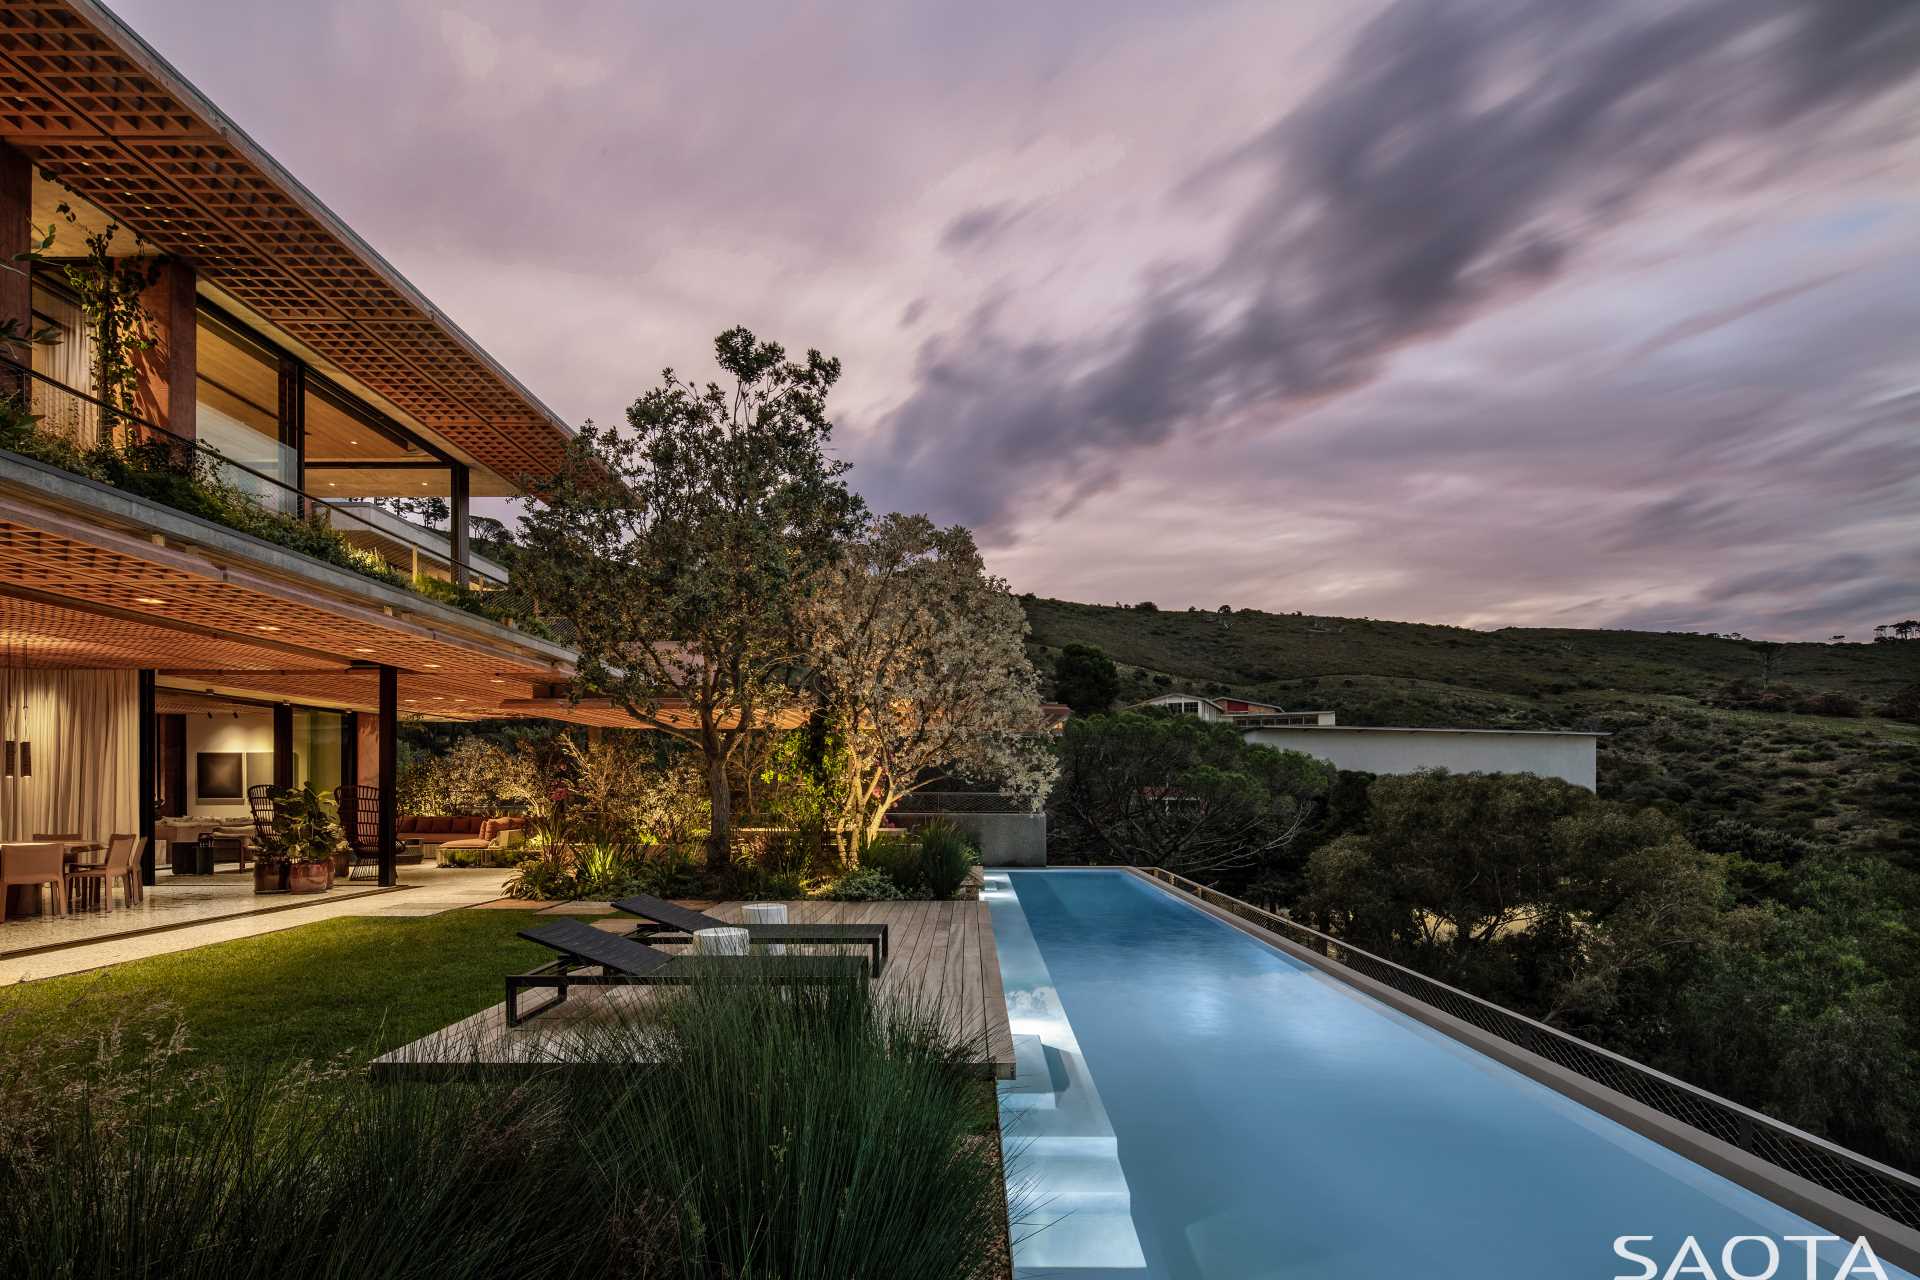 This modern home features a swimming pool and outdoor spaces, some of which are paved in Rustenburg granite and local sandstone.